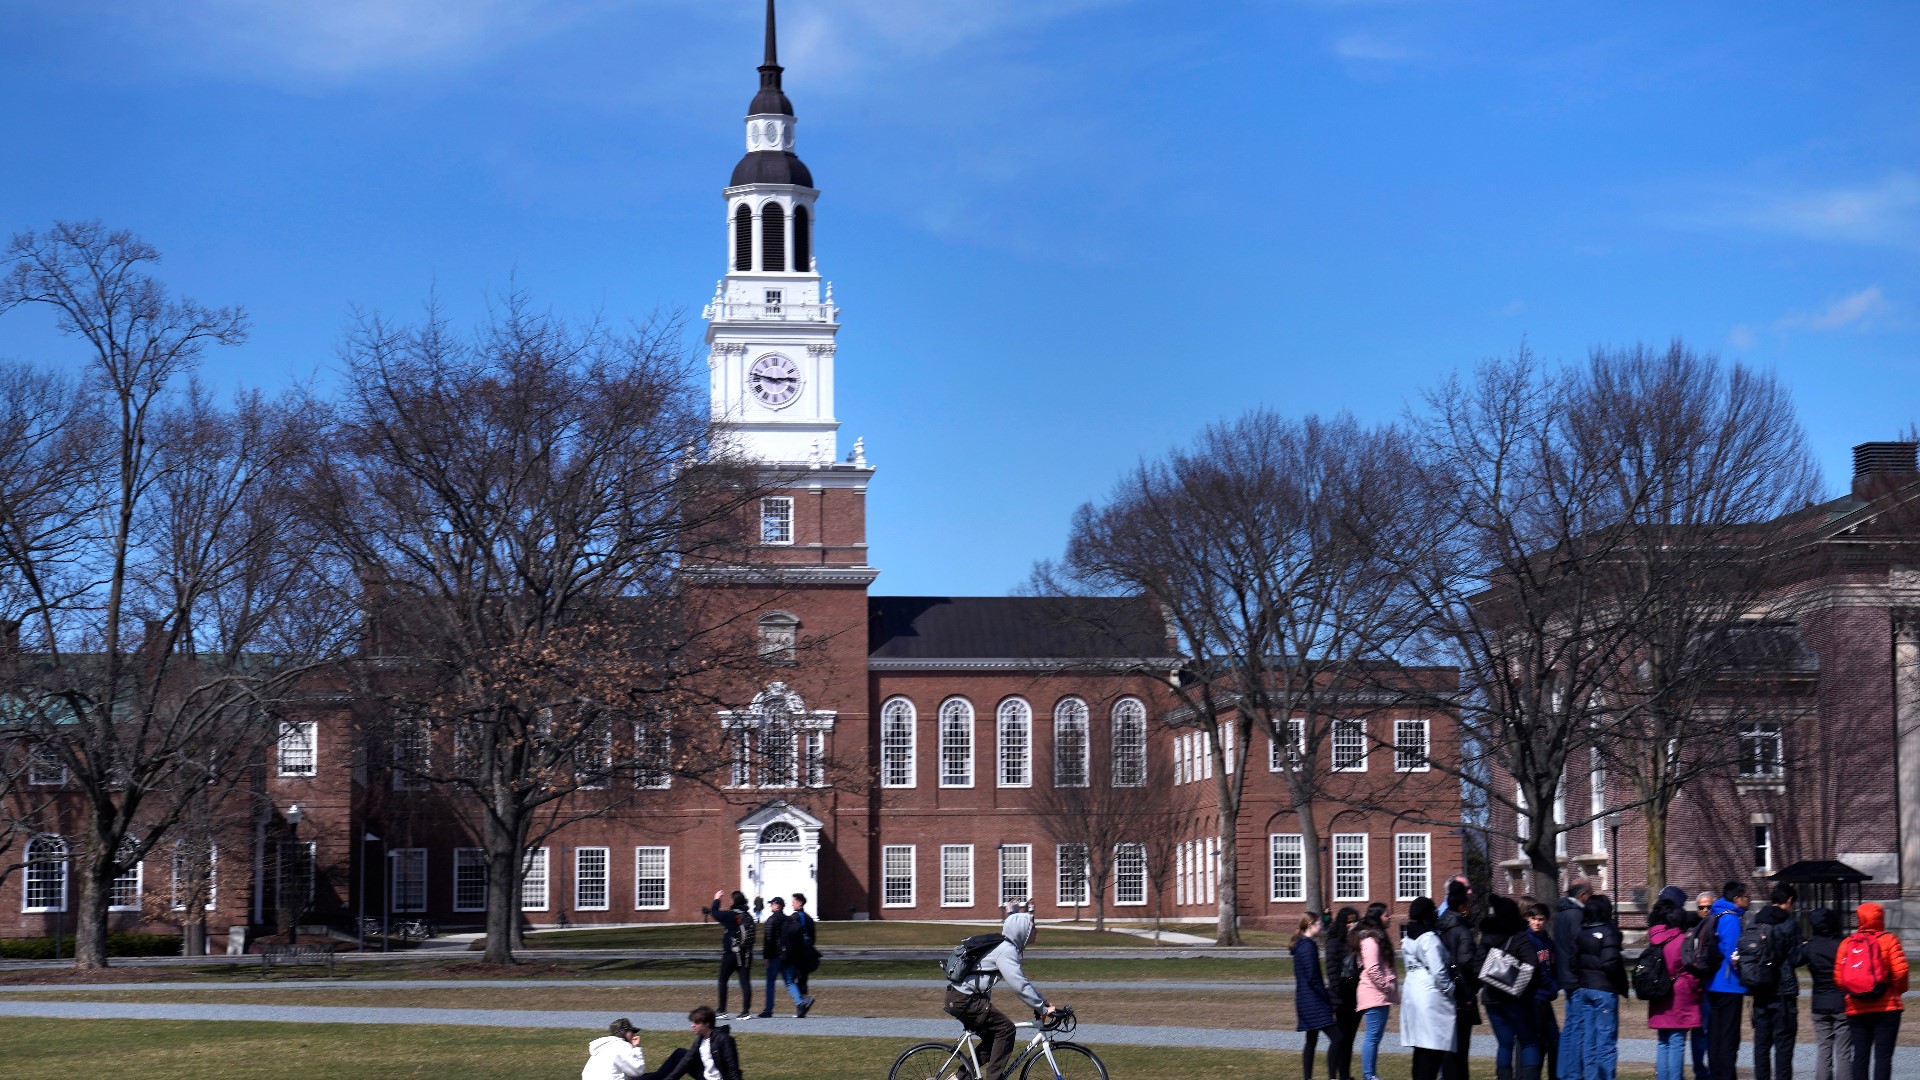 The police chief for Hanover, New Hampshire's department said Dartmouth's security team was expecting a student protest.